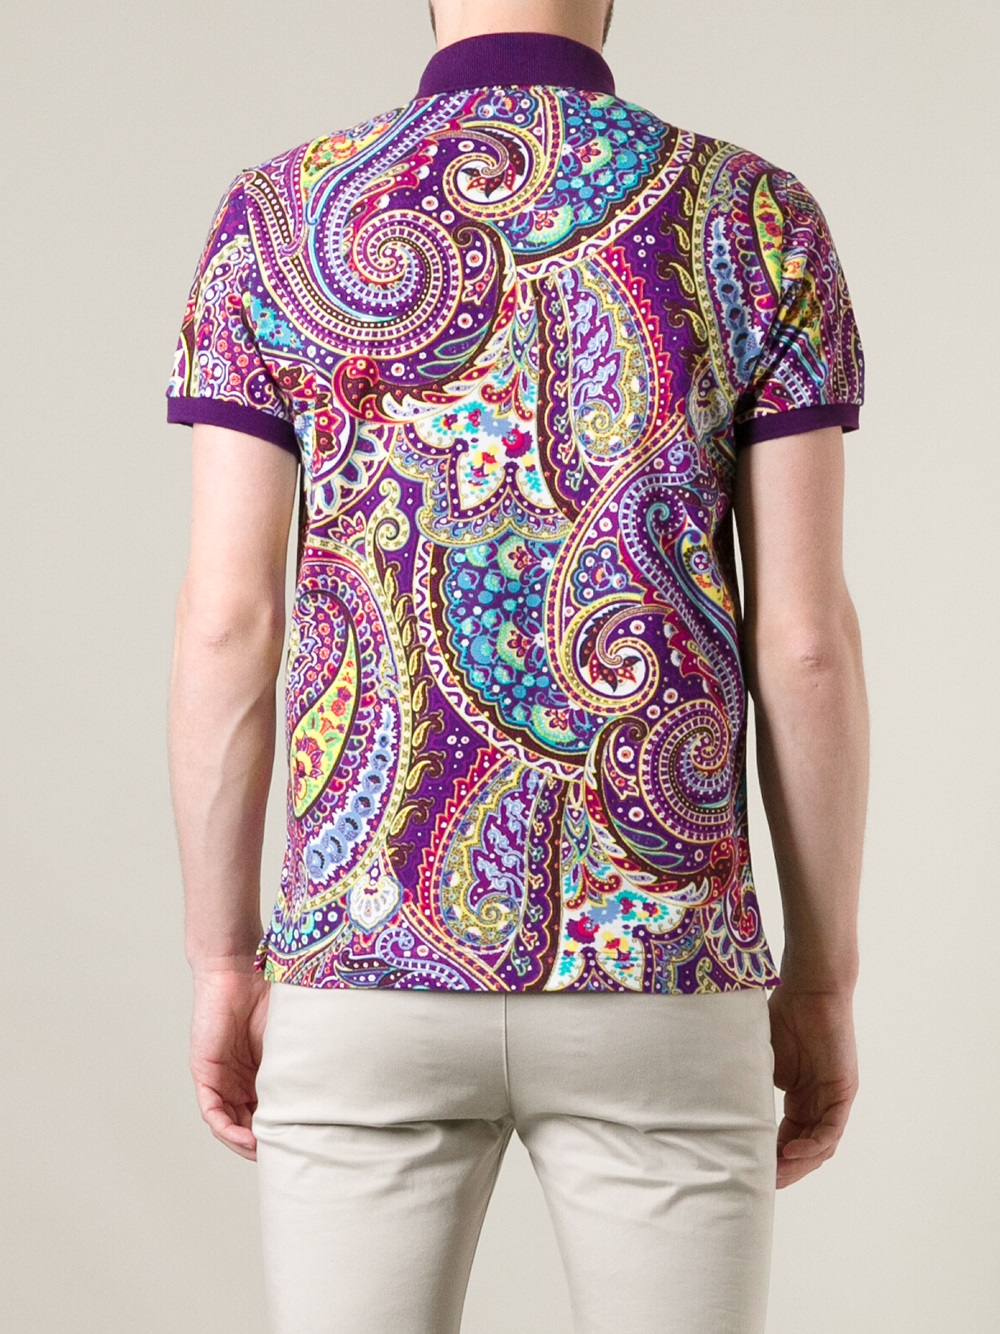 Lyst - Etro Paisley Print Polo Shirt in Purple for Men